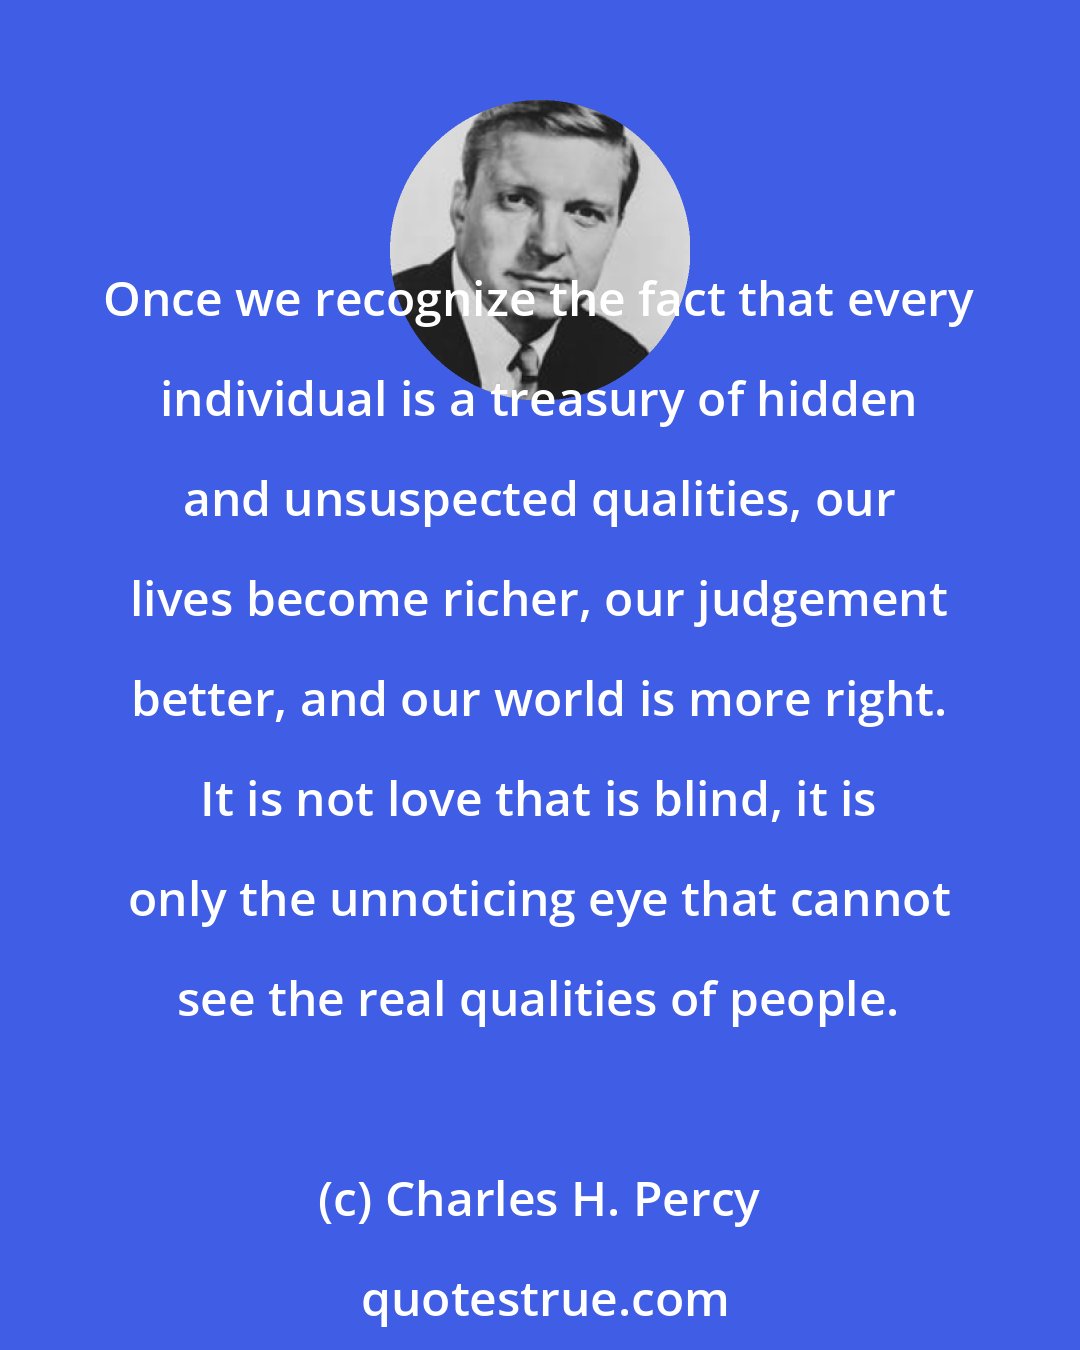 Charles H. Percy: Once we recognize the fact that every individual is a treasury of hidden and unsuspected qualities, our lives become richer, our judgement better, and our world is more right. It is not love that is blind, it is only the unnoticing eye that cannot see the real qualities of people.